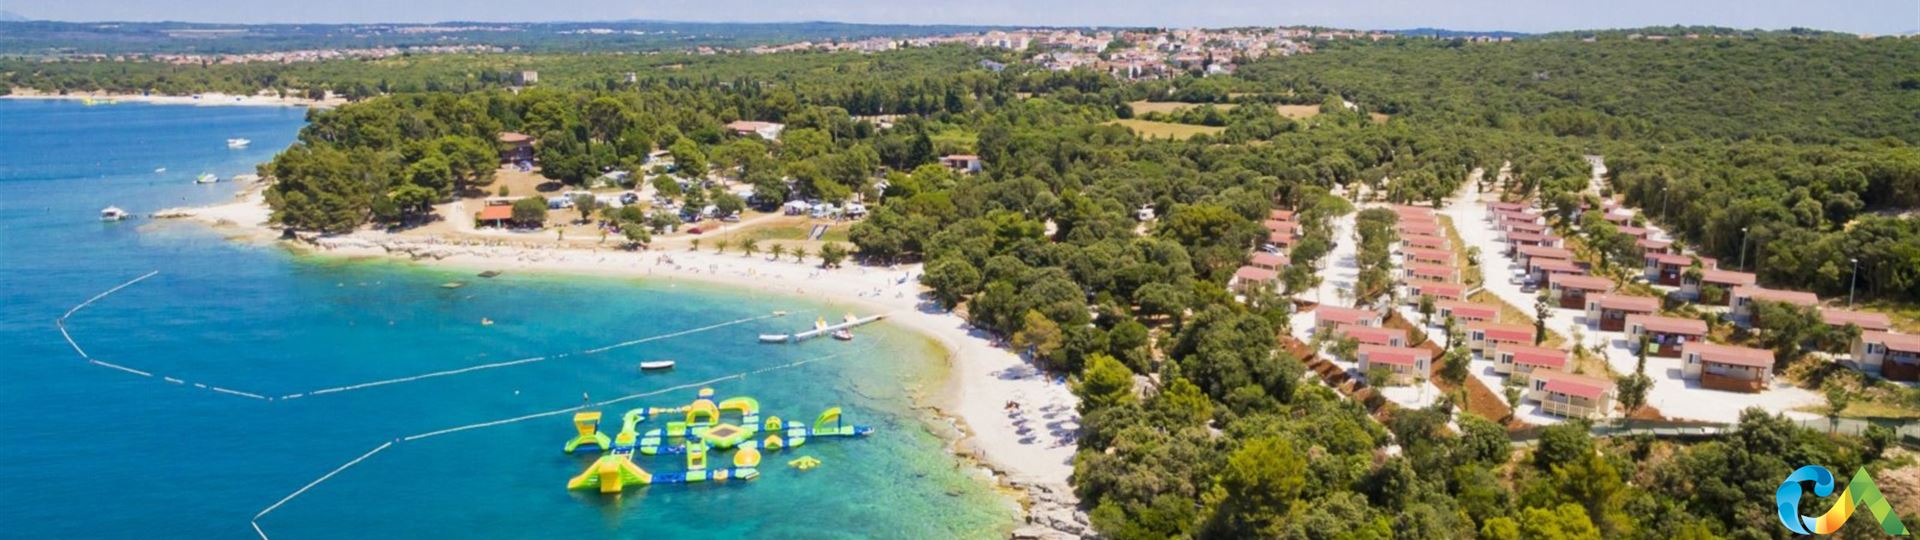 Brioni Sunny camping (Ex Puntizela) Sommer 2022. Discount bis 20% 